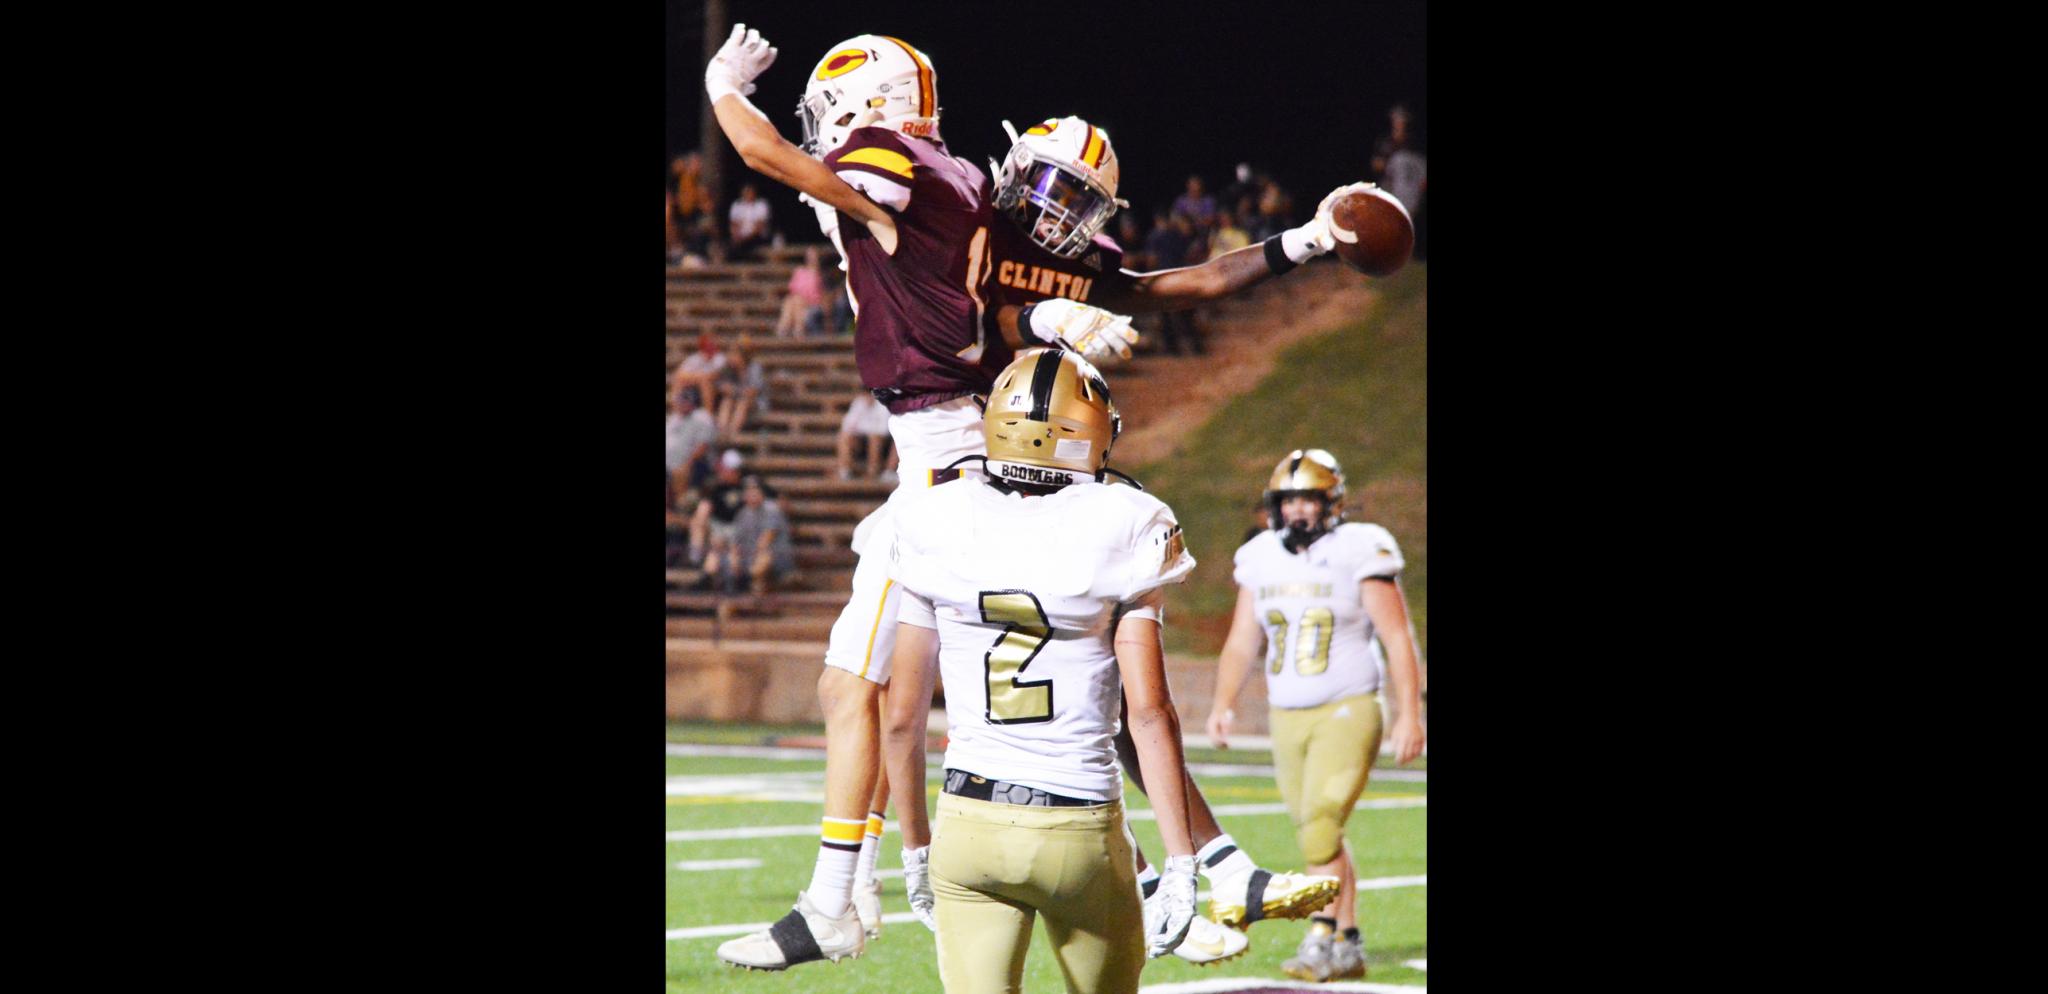 Clinton wide receivers Ty Newcomb, left, and A.T. Bryson, right, jump into the air to celebrate Bryson's touchdown catch against Woodward.